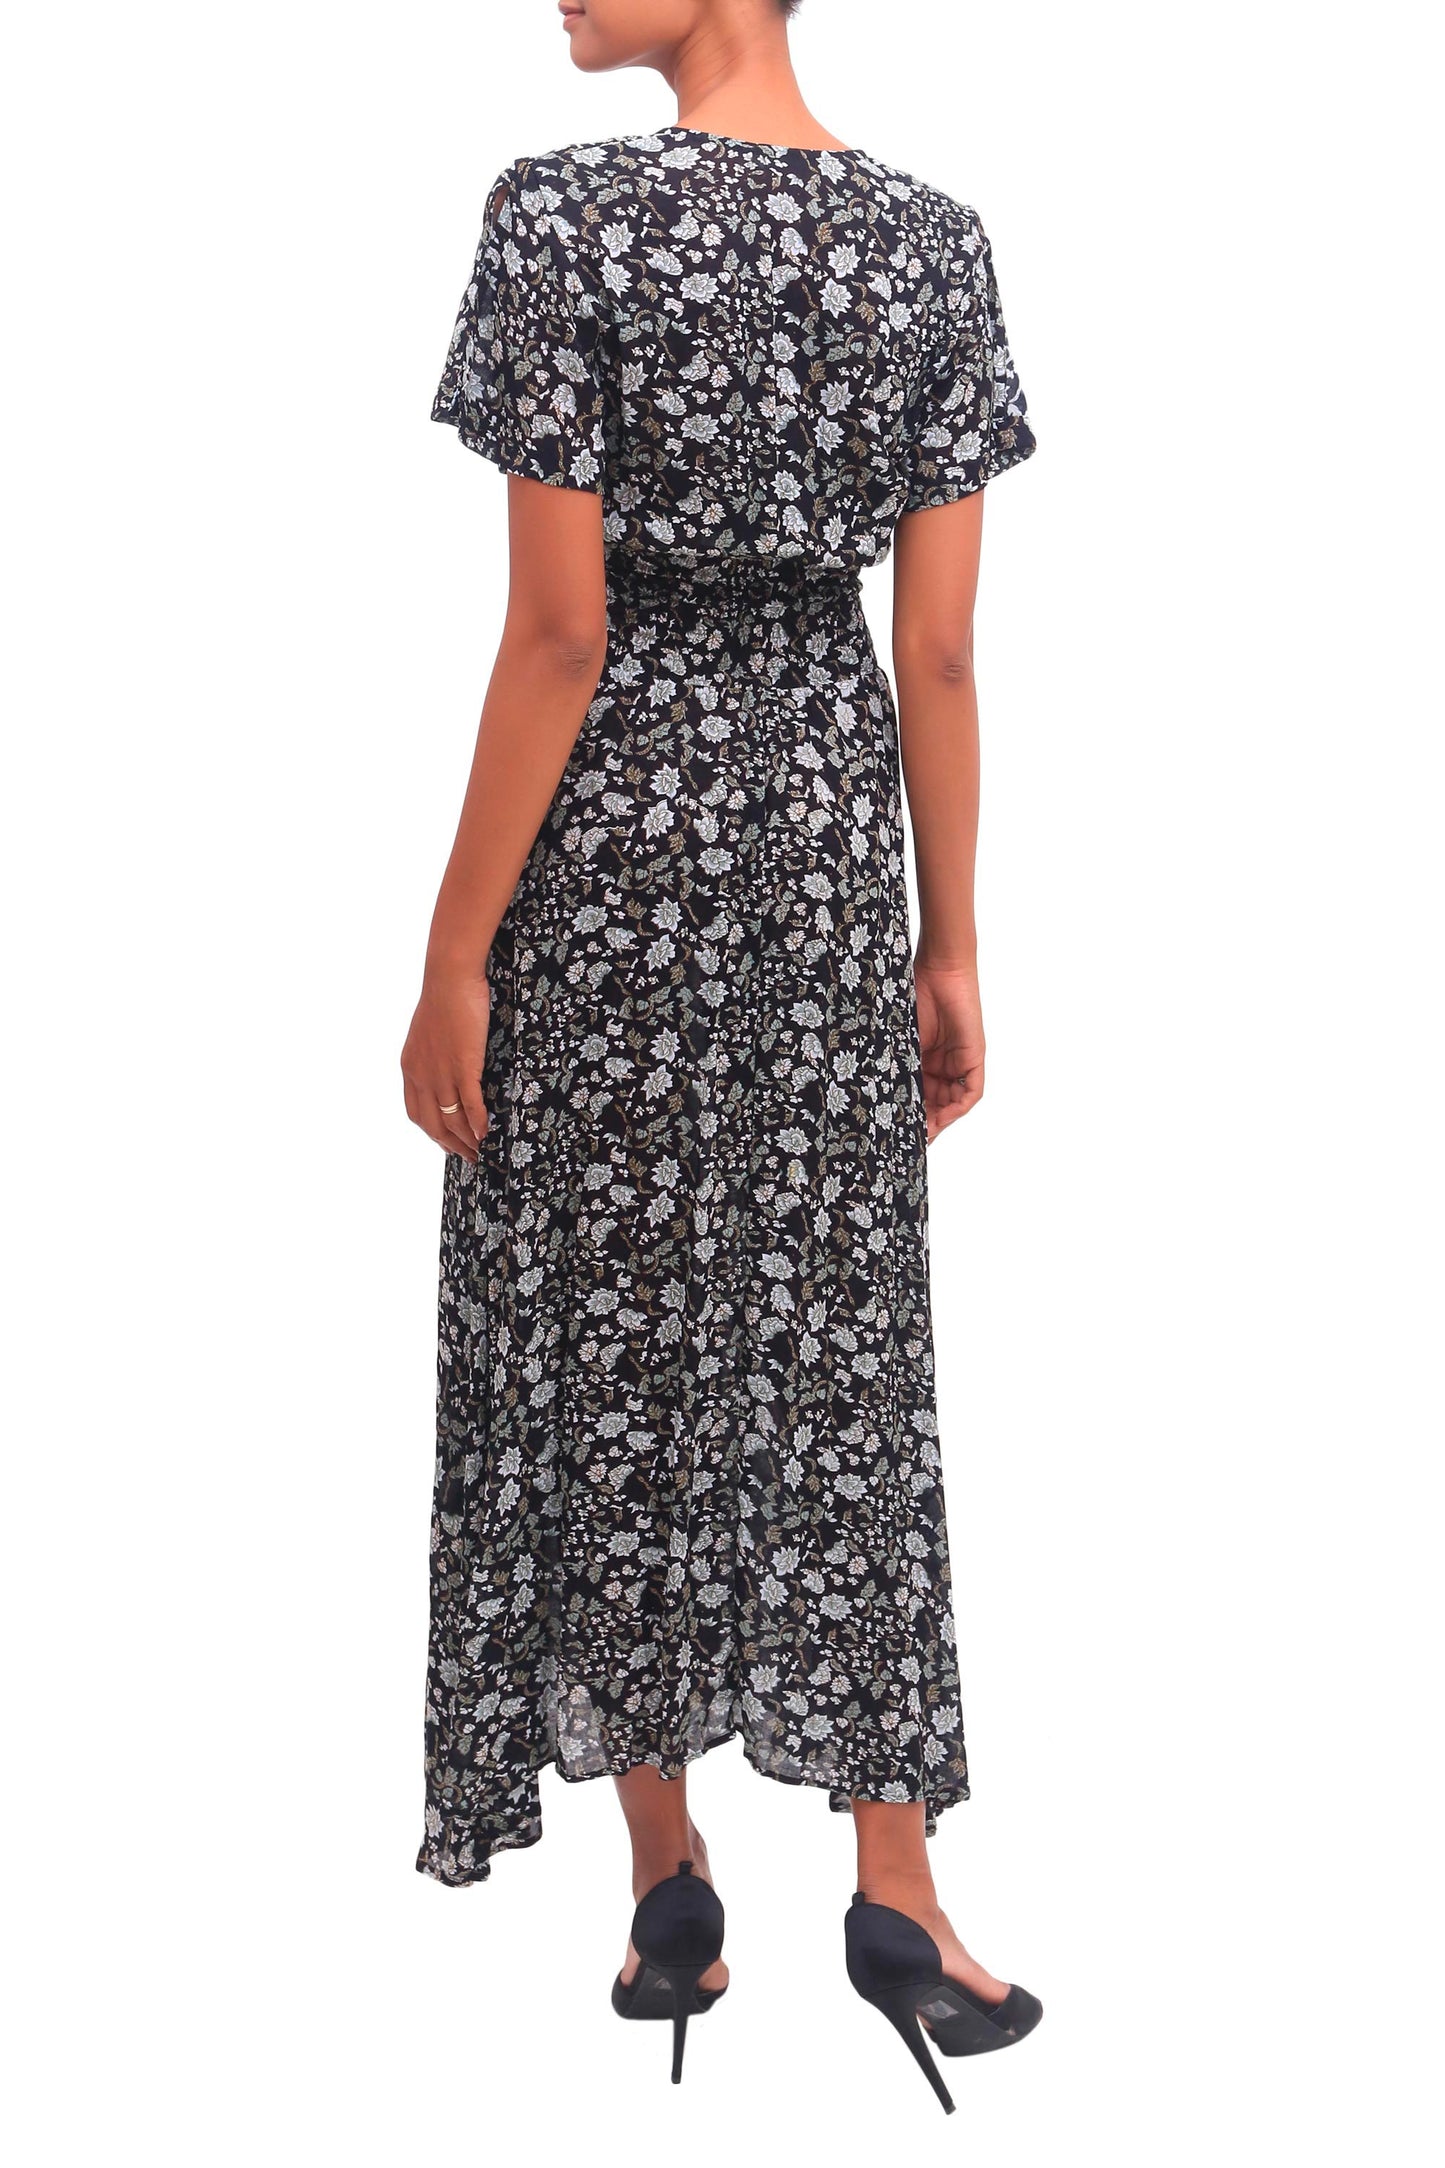 Bali Garden Short Sleeve White and Olive Floral on Black Rayon Dress